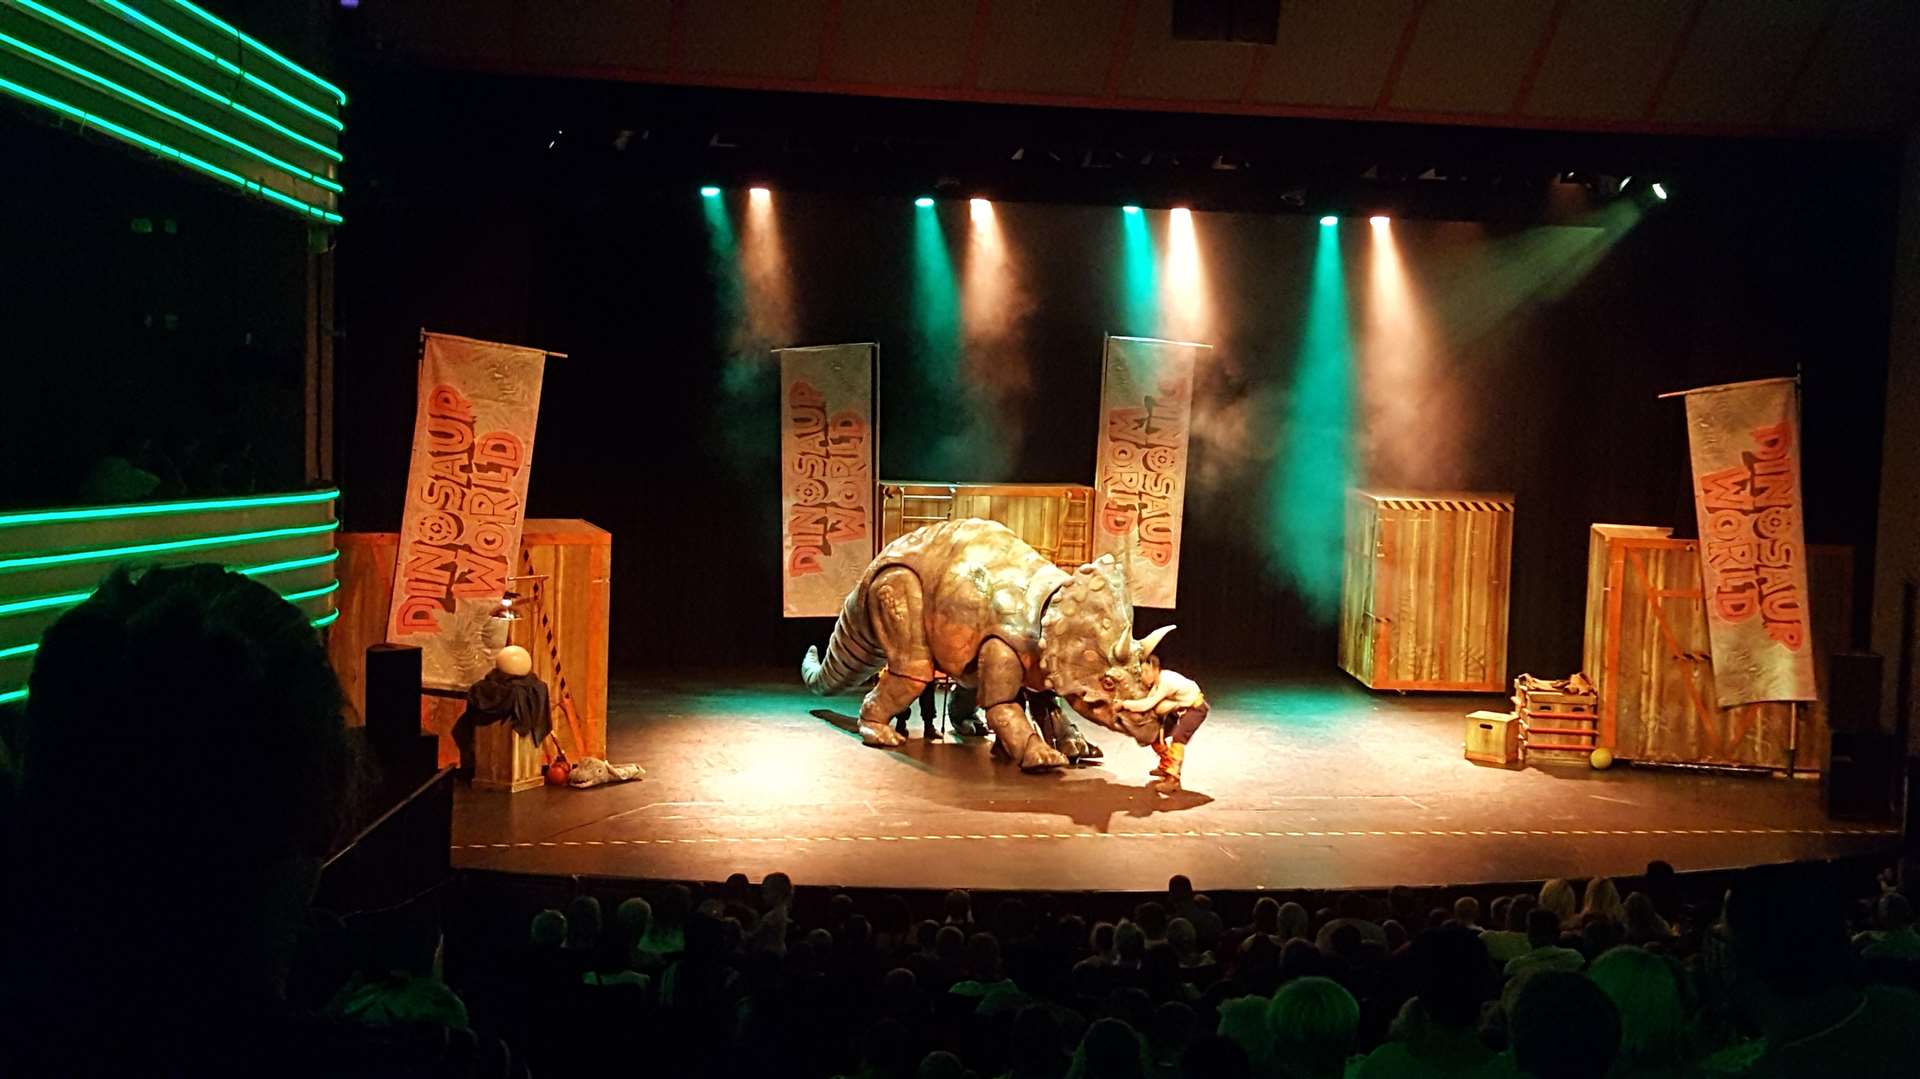 The Triceratops is introduced on stage